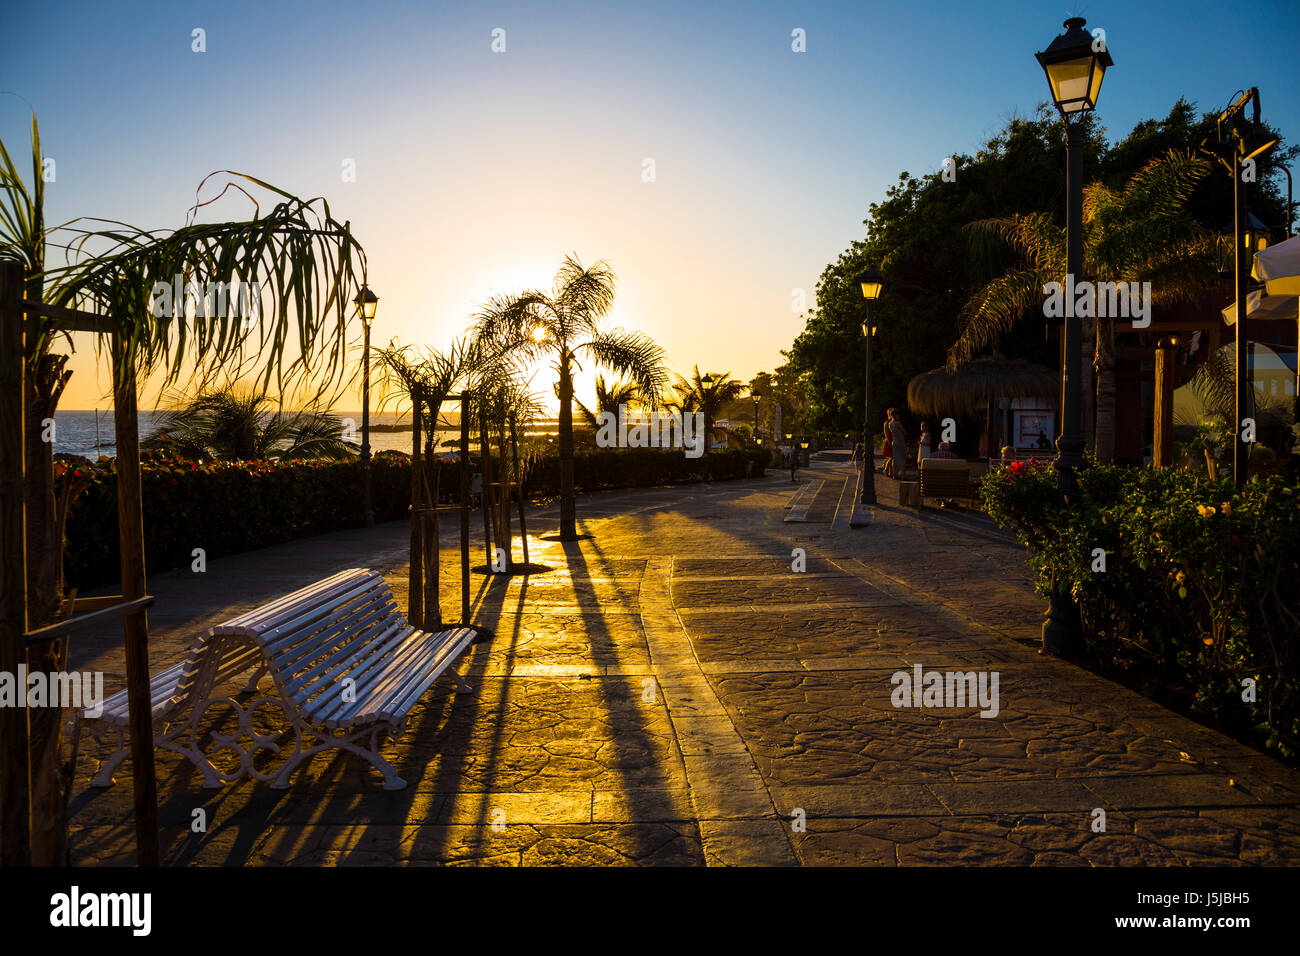 Promenade by the beach at Playa del Duque, Tenerife, Spain Stock Photo